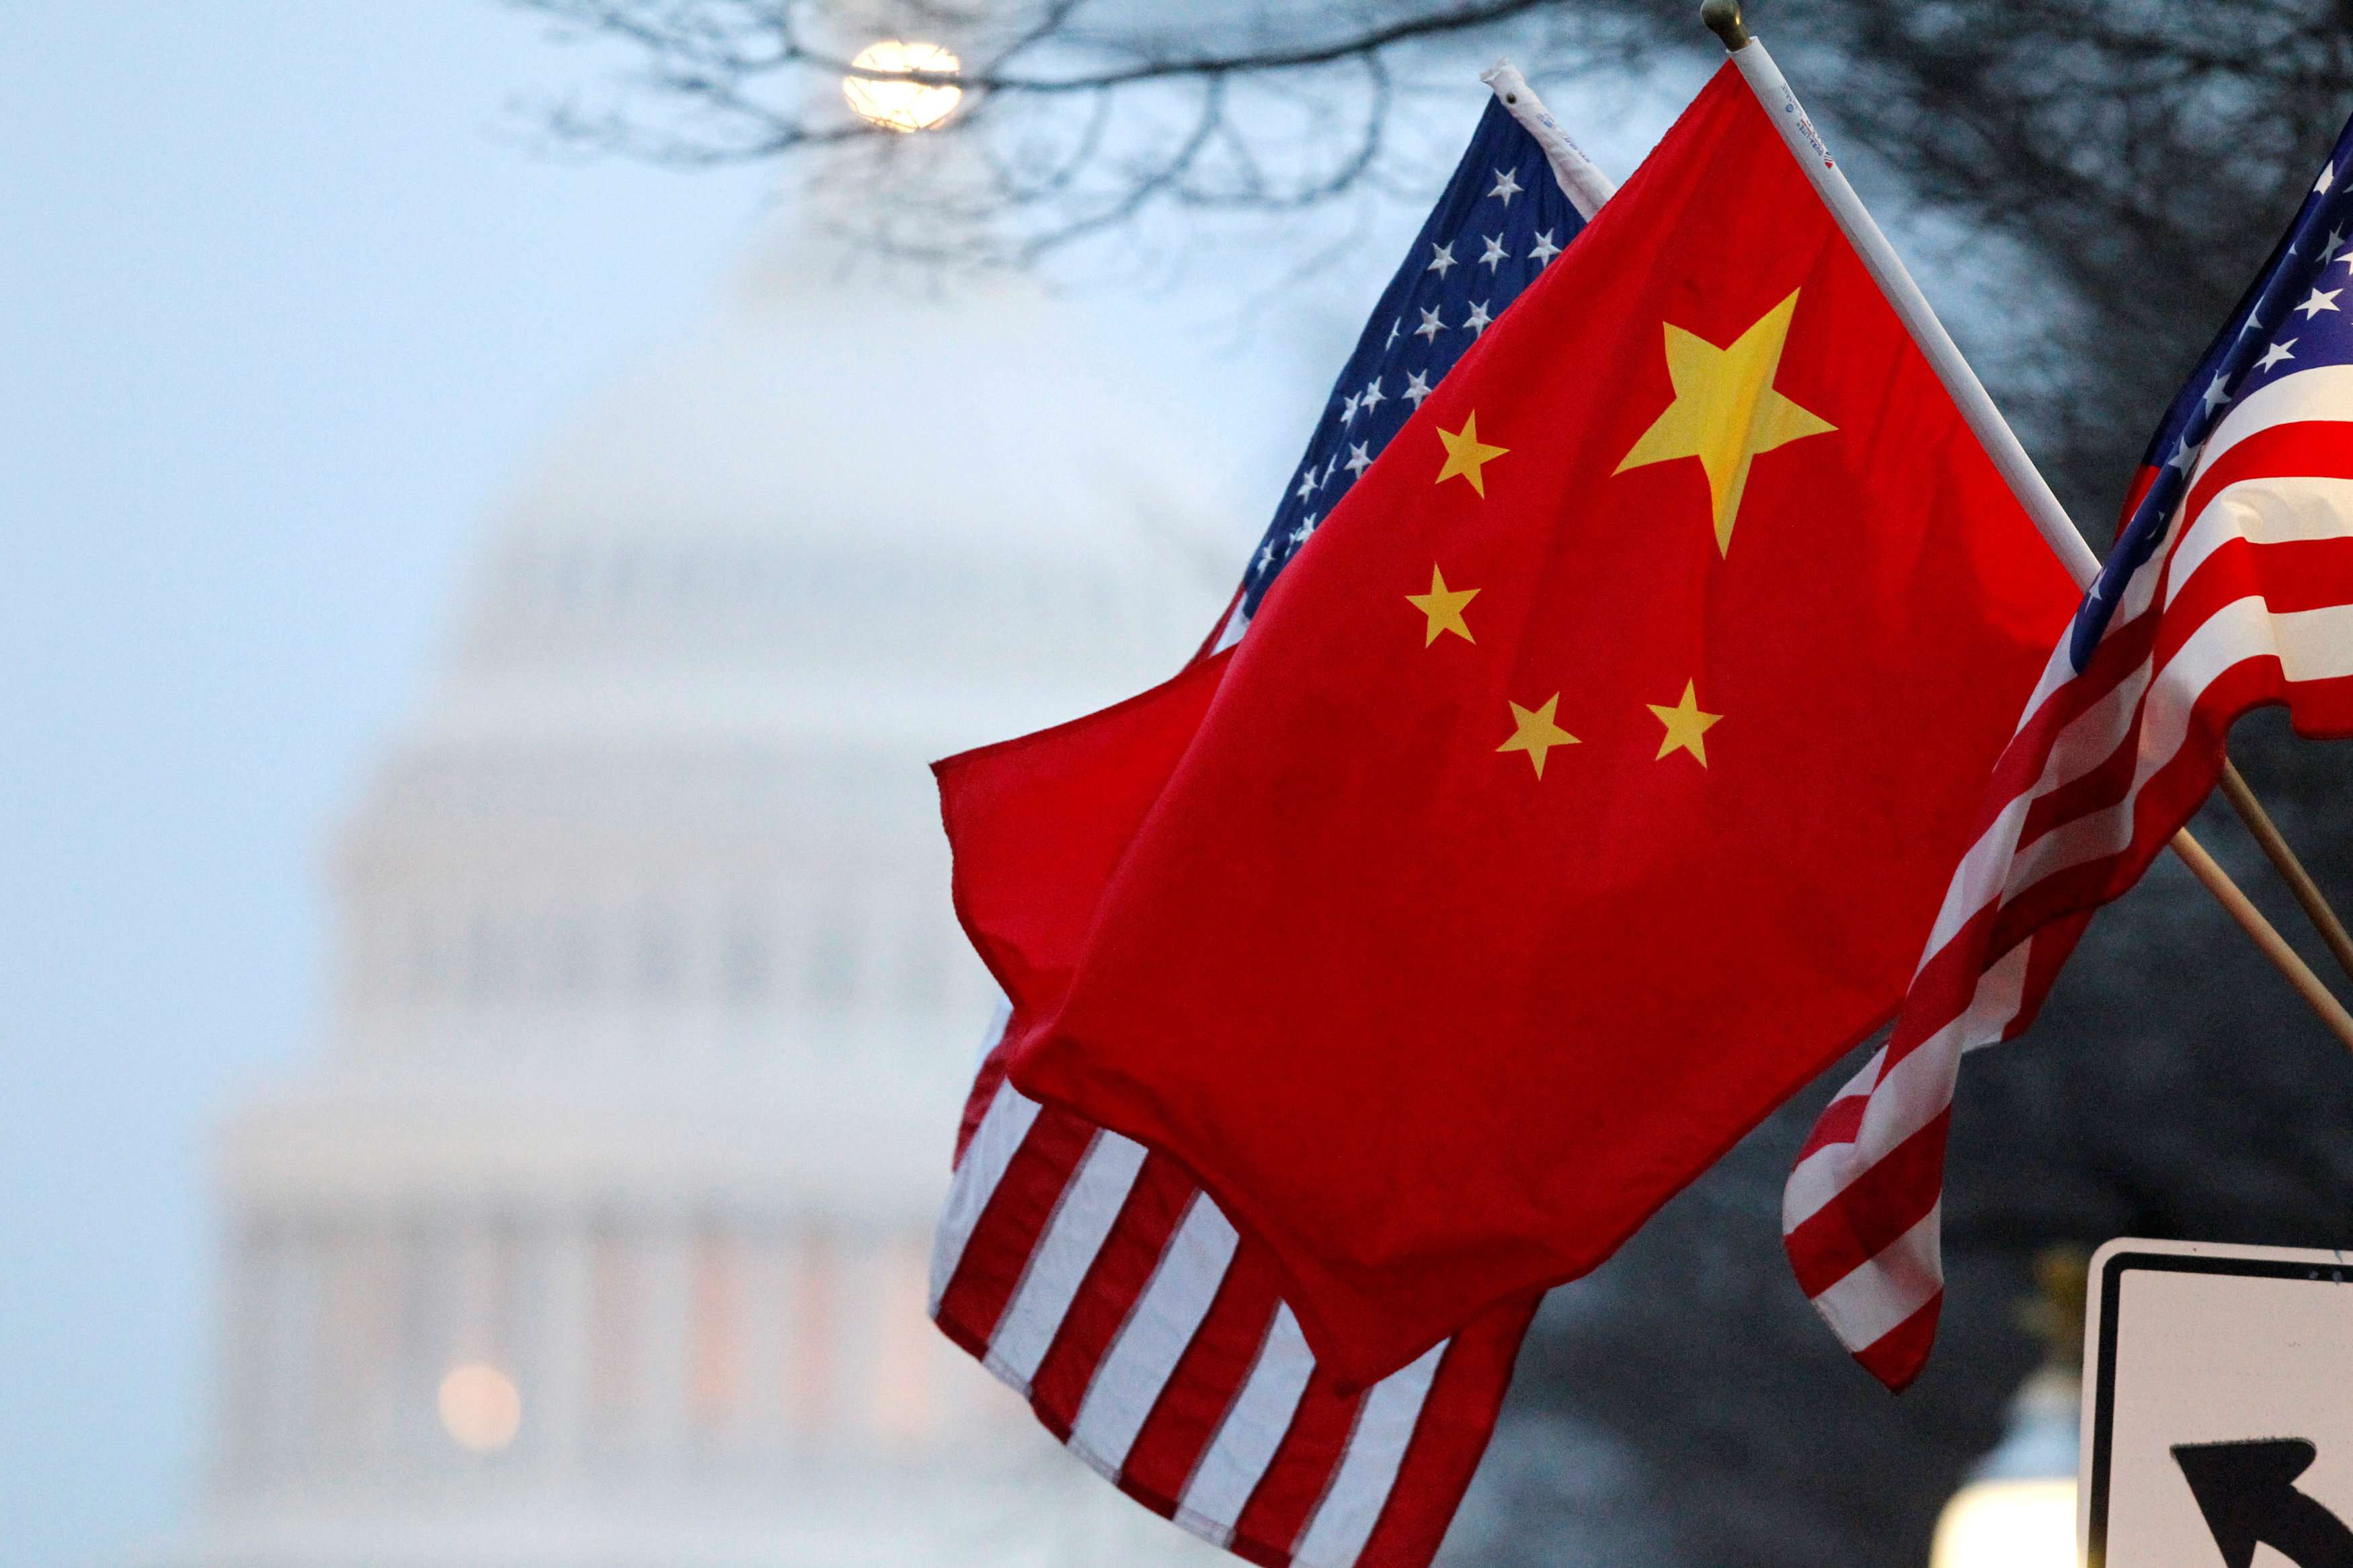 The Chinese and US flags side-by-side along Washington’s Pennsylvania Avenue during former Chinese President Hu Jintao's state visit to the US capital in 2011. Relations have chilled considerably between the world’s two largest economies since. Photo: Reuters